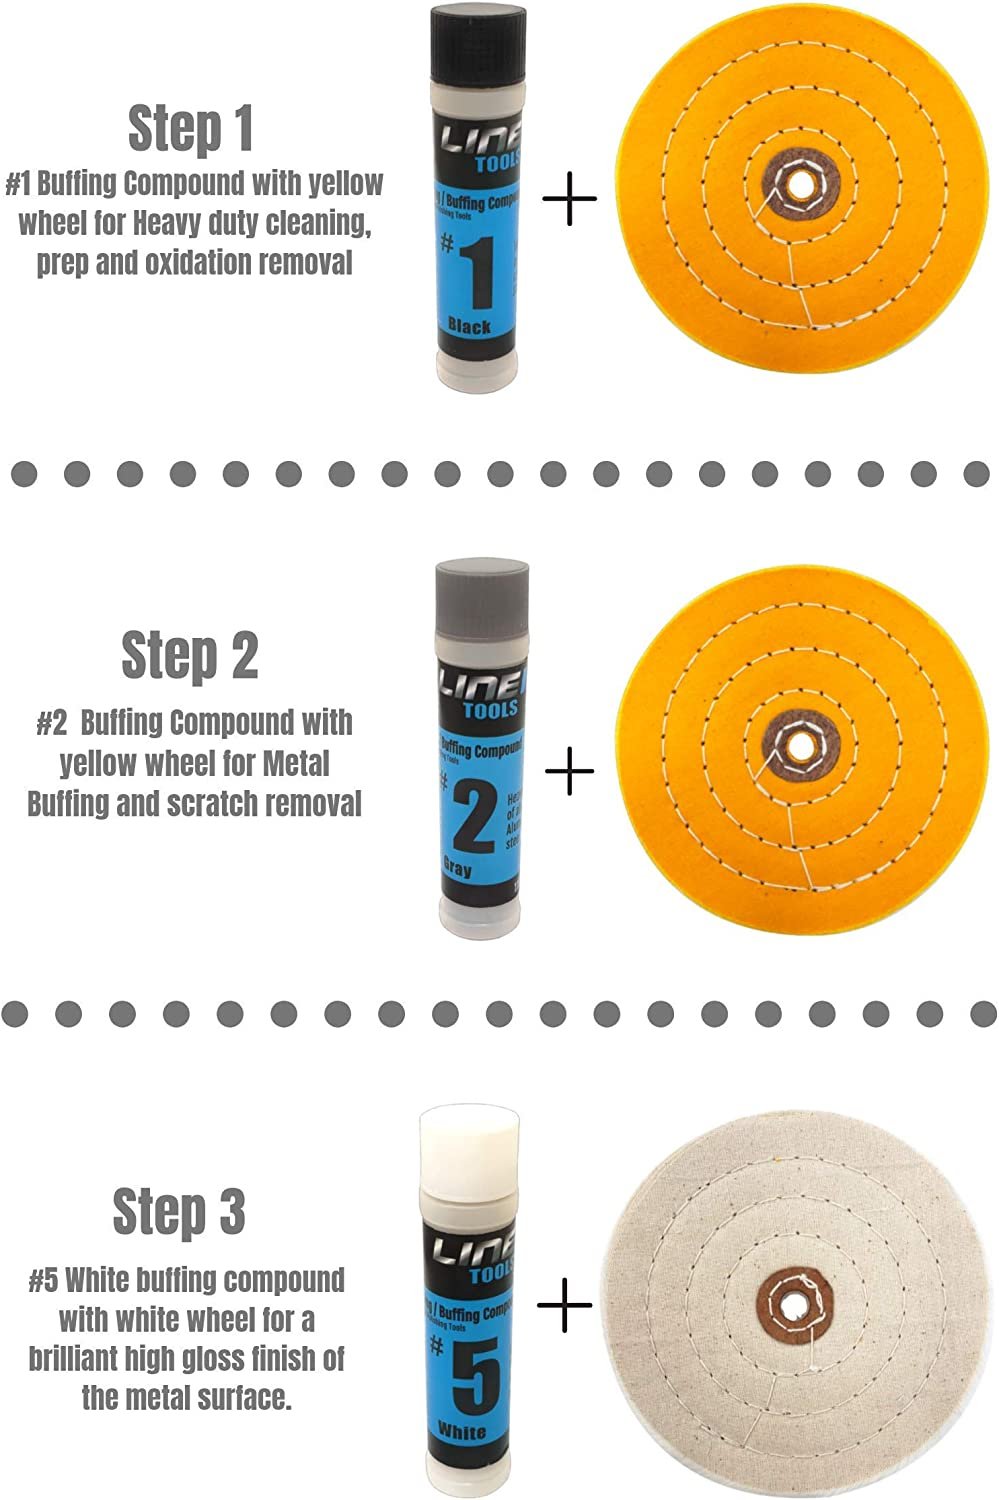 Easy Ways to Clean a Buffing Wheel: 12 Steps (with Pictures)